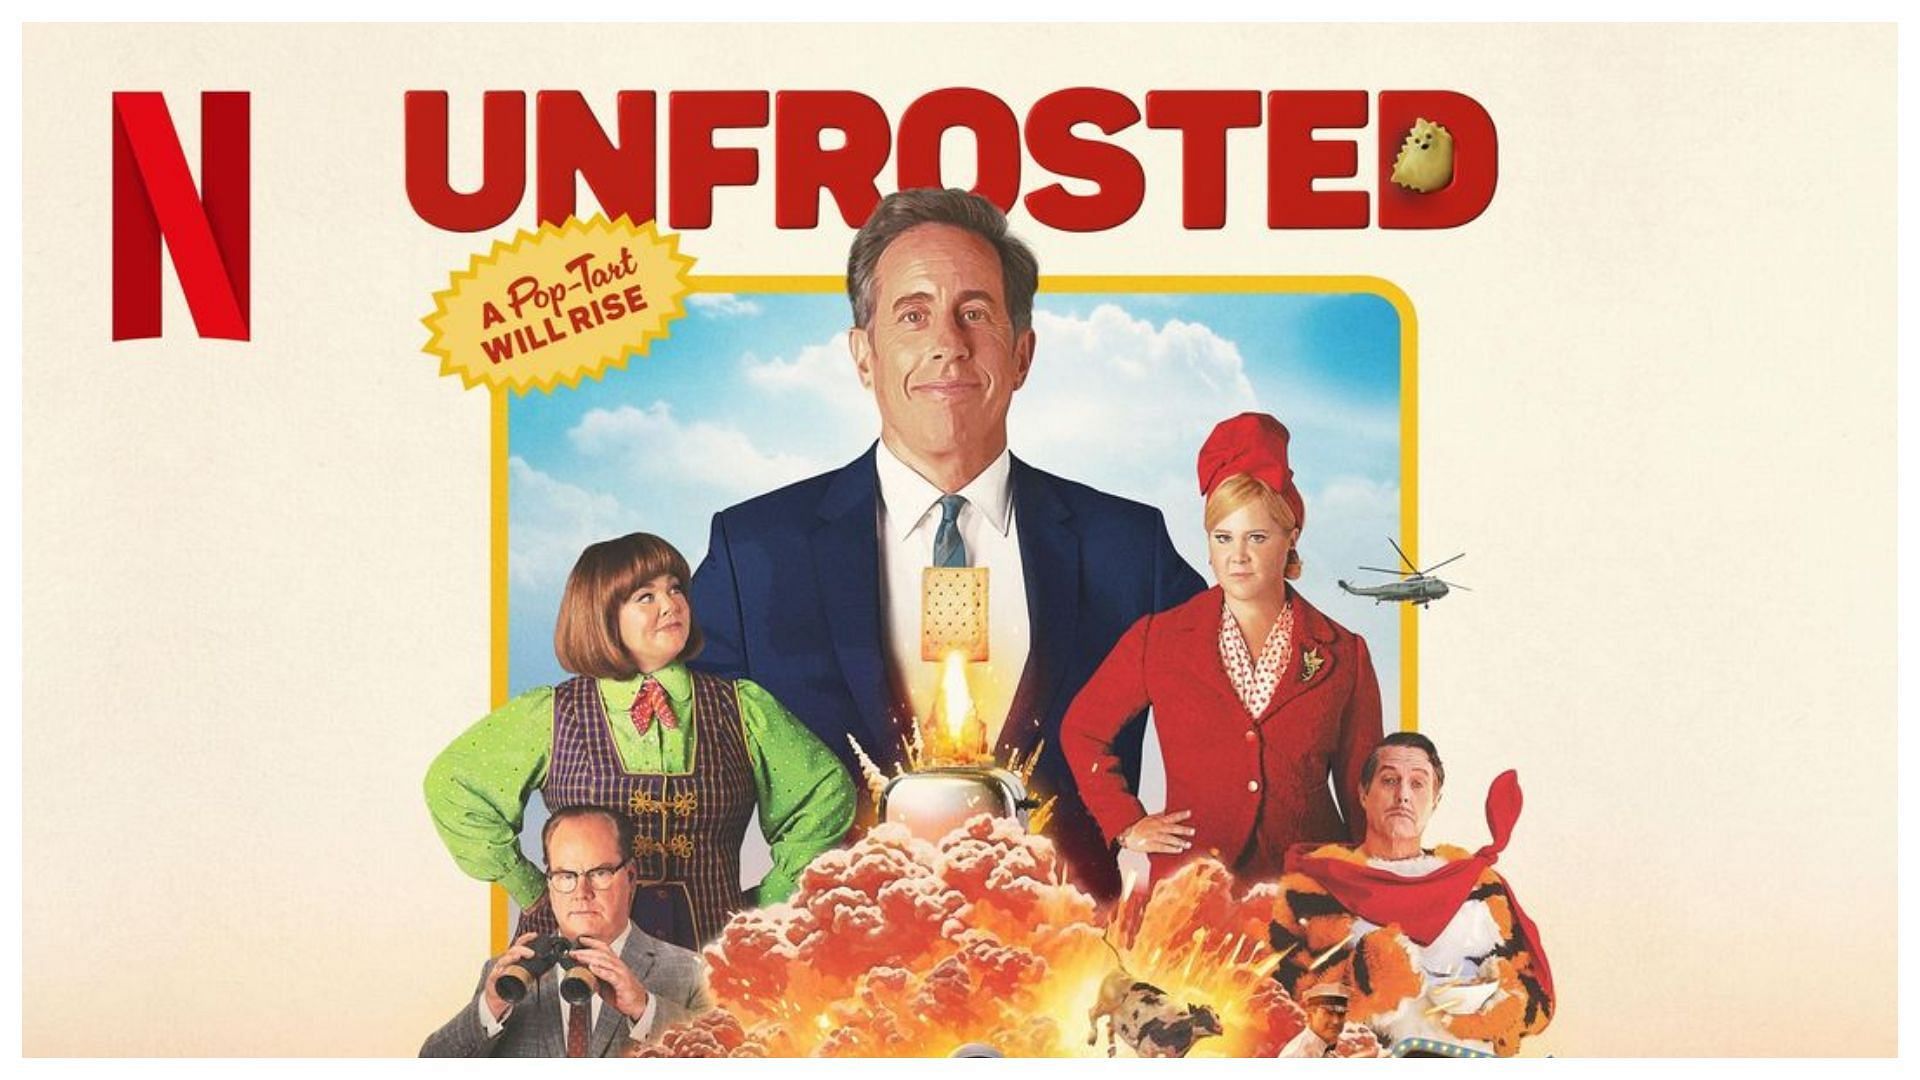 The true story behind Jerry Seinfeld's Unfrosted, explored